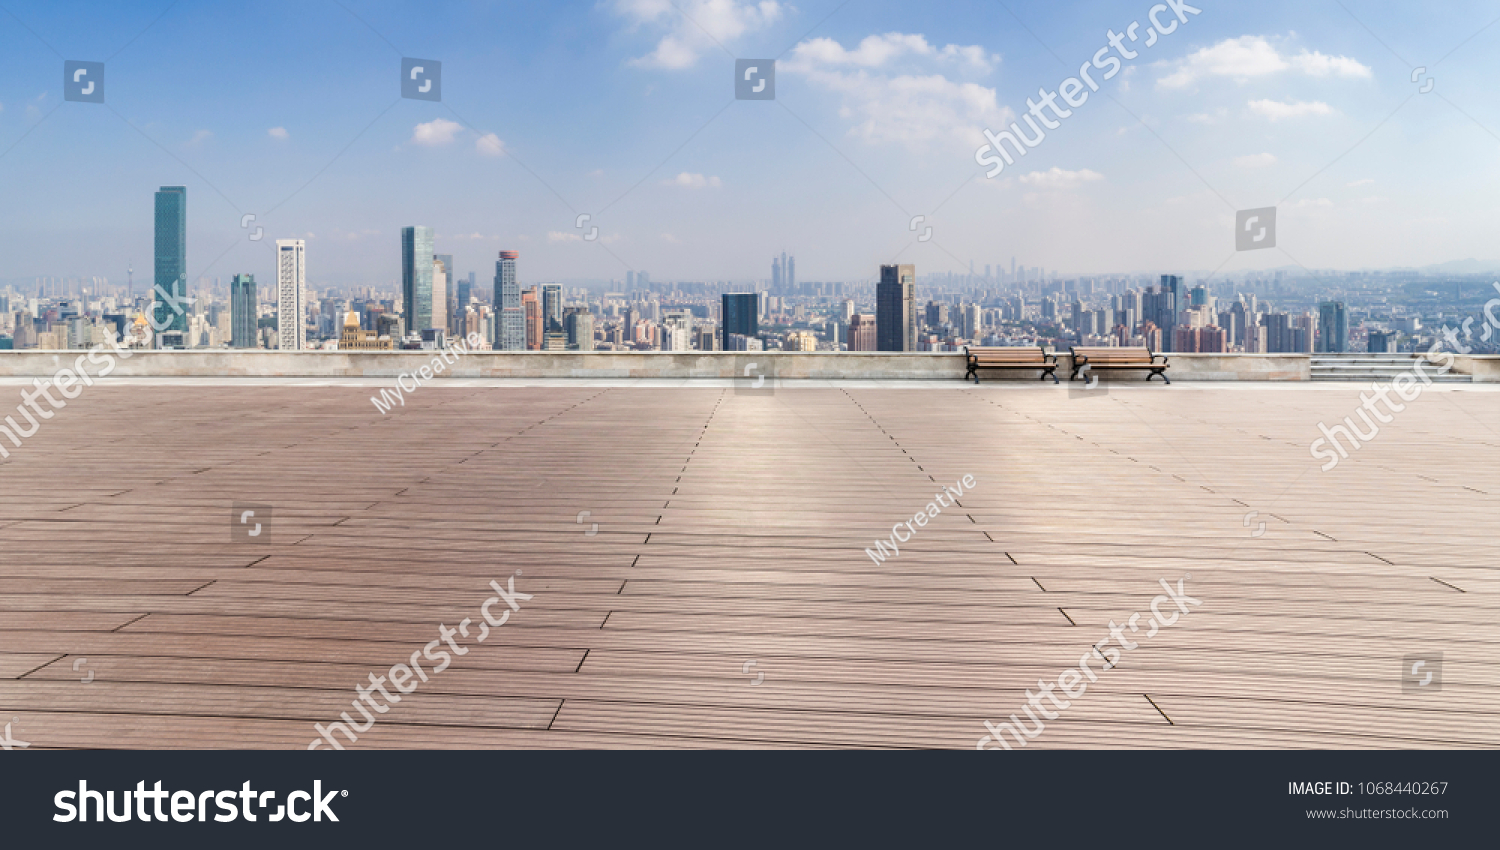 Panoramic skyline and buildings with empty concrete square floor
 #1068440267